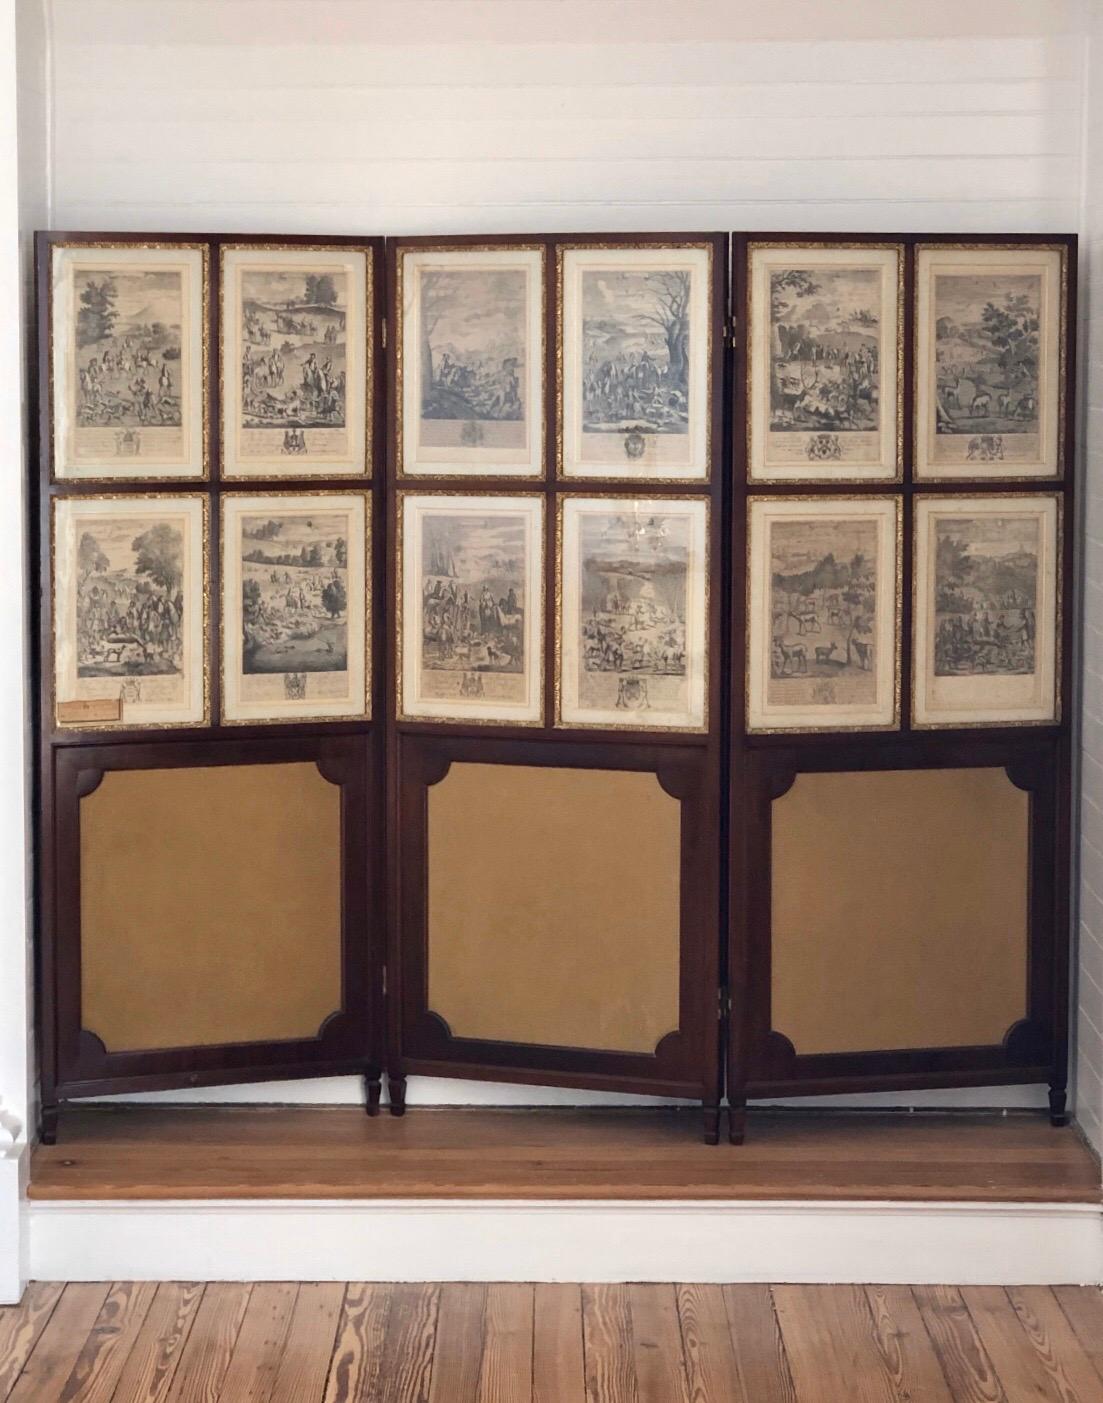 Regal set of twenty-four steel engravings of English Hunt Scenes by Richard Blome (1635-1705) framed in a pair of three panel mahogany Regency Screens, 17th century. The etchings are from 